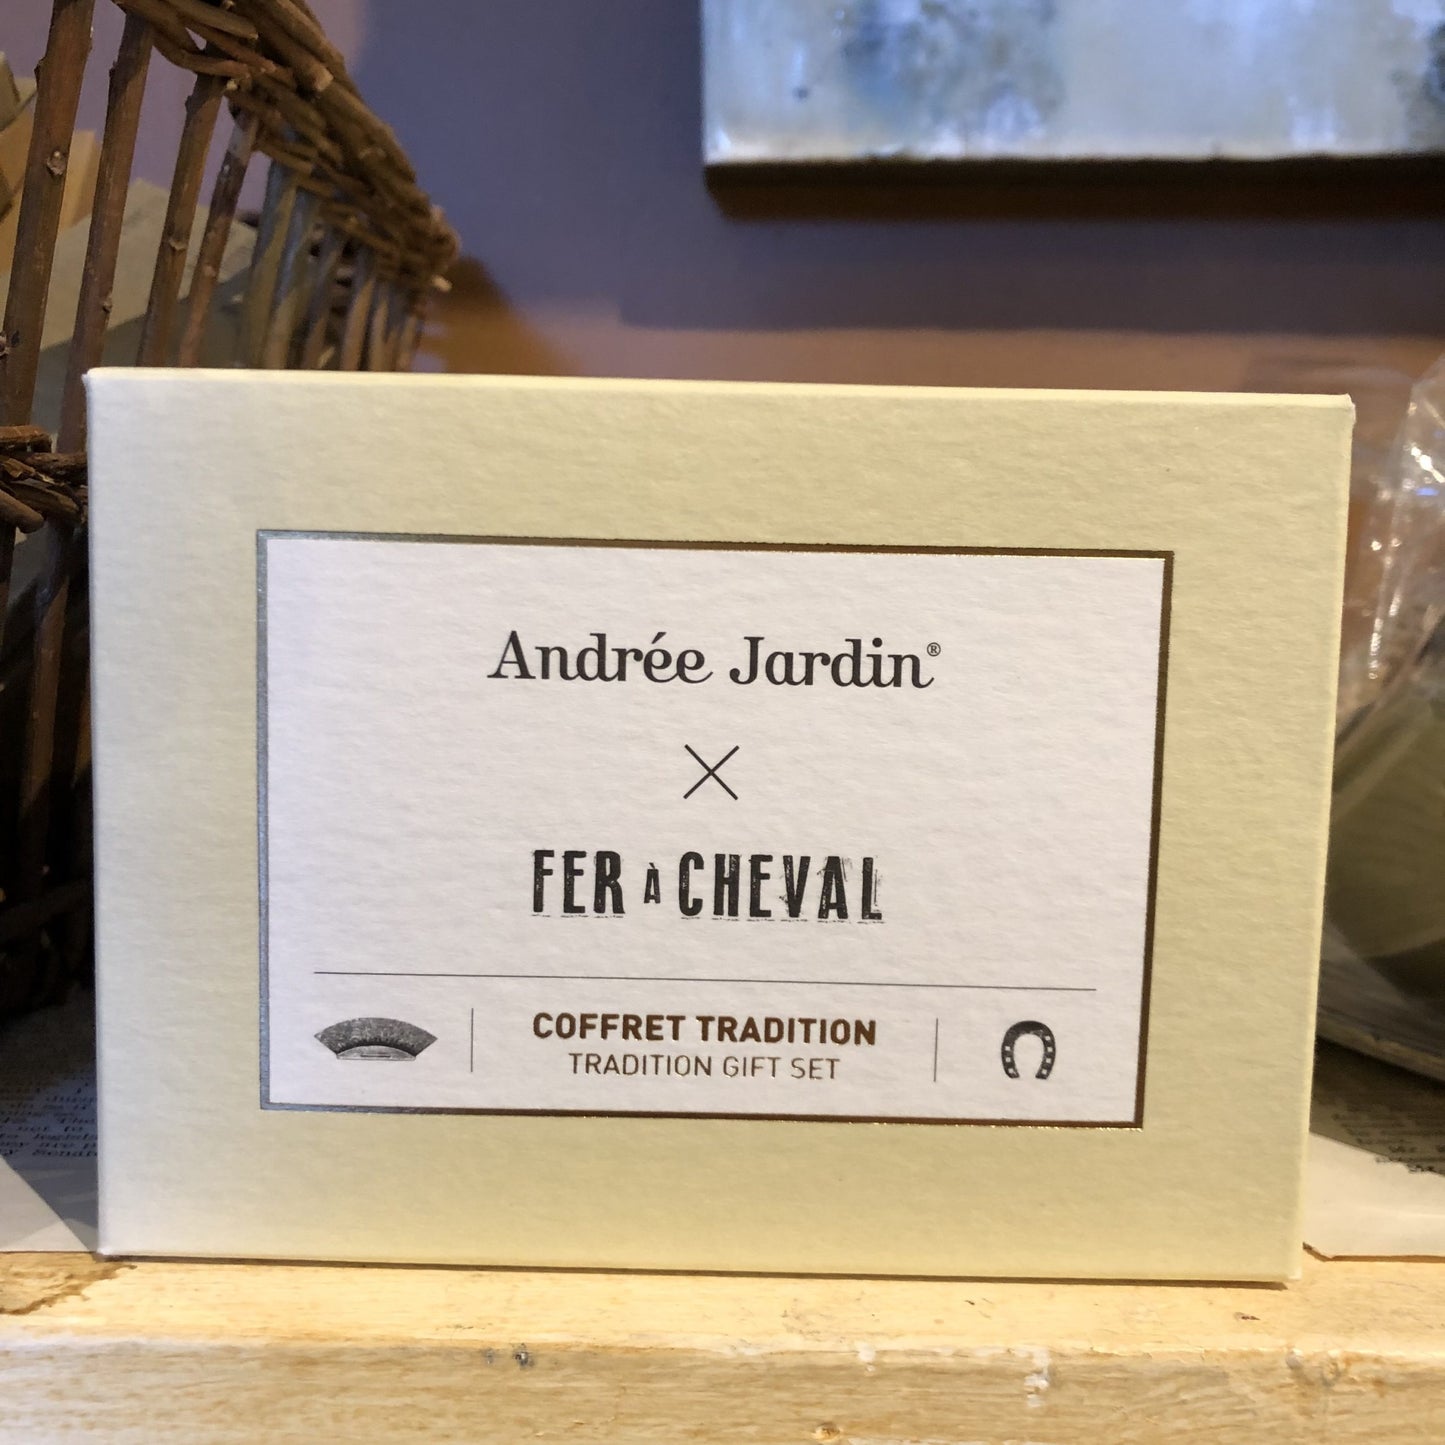 Andree Jardin and Fer Cheval Gift Set